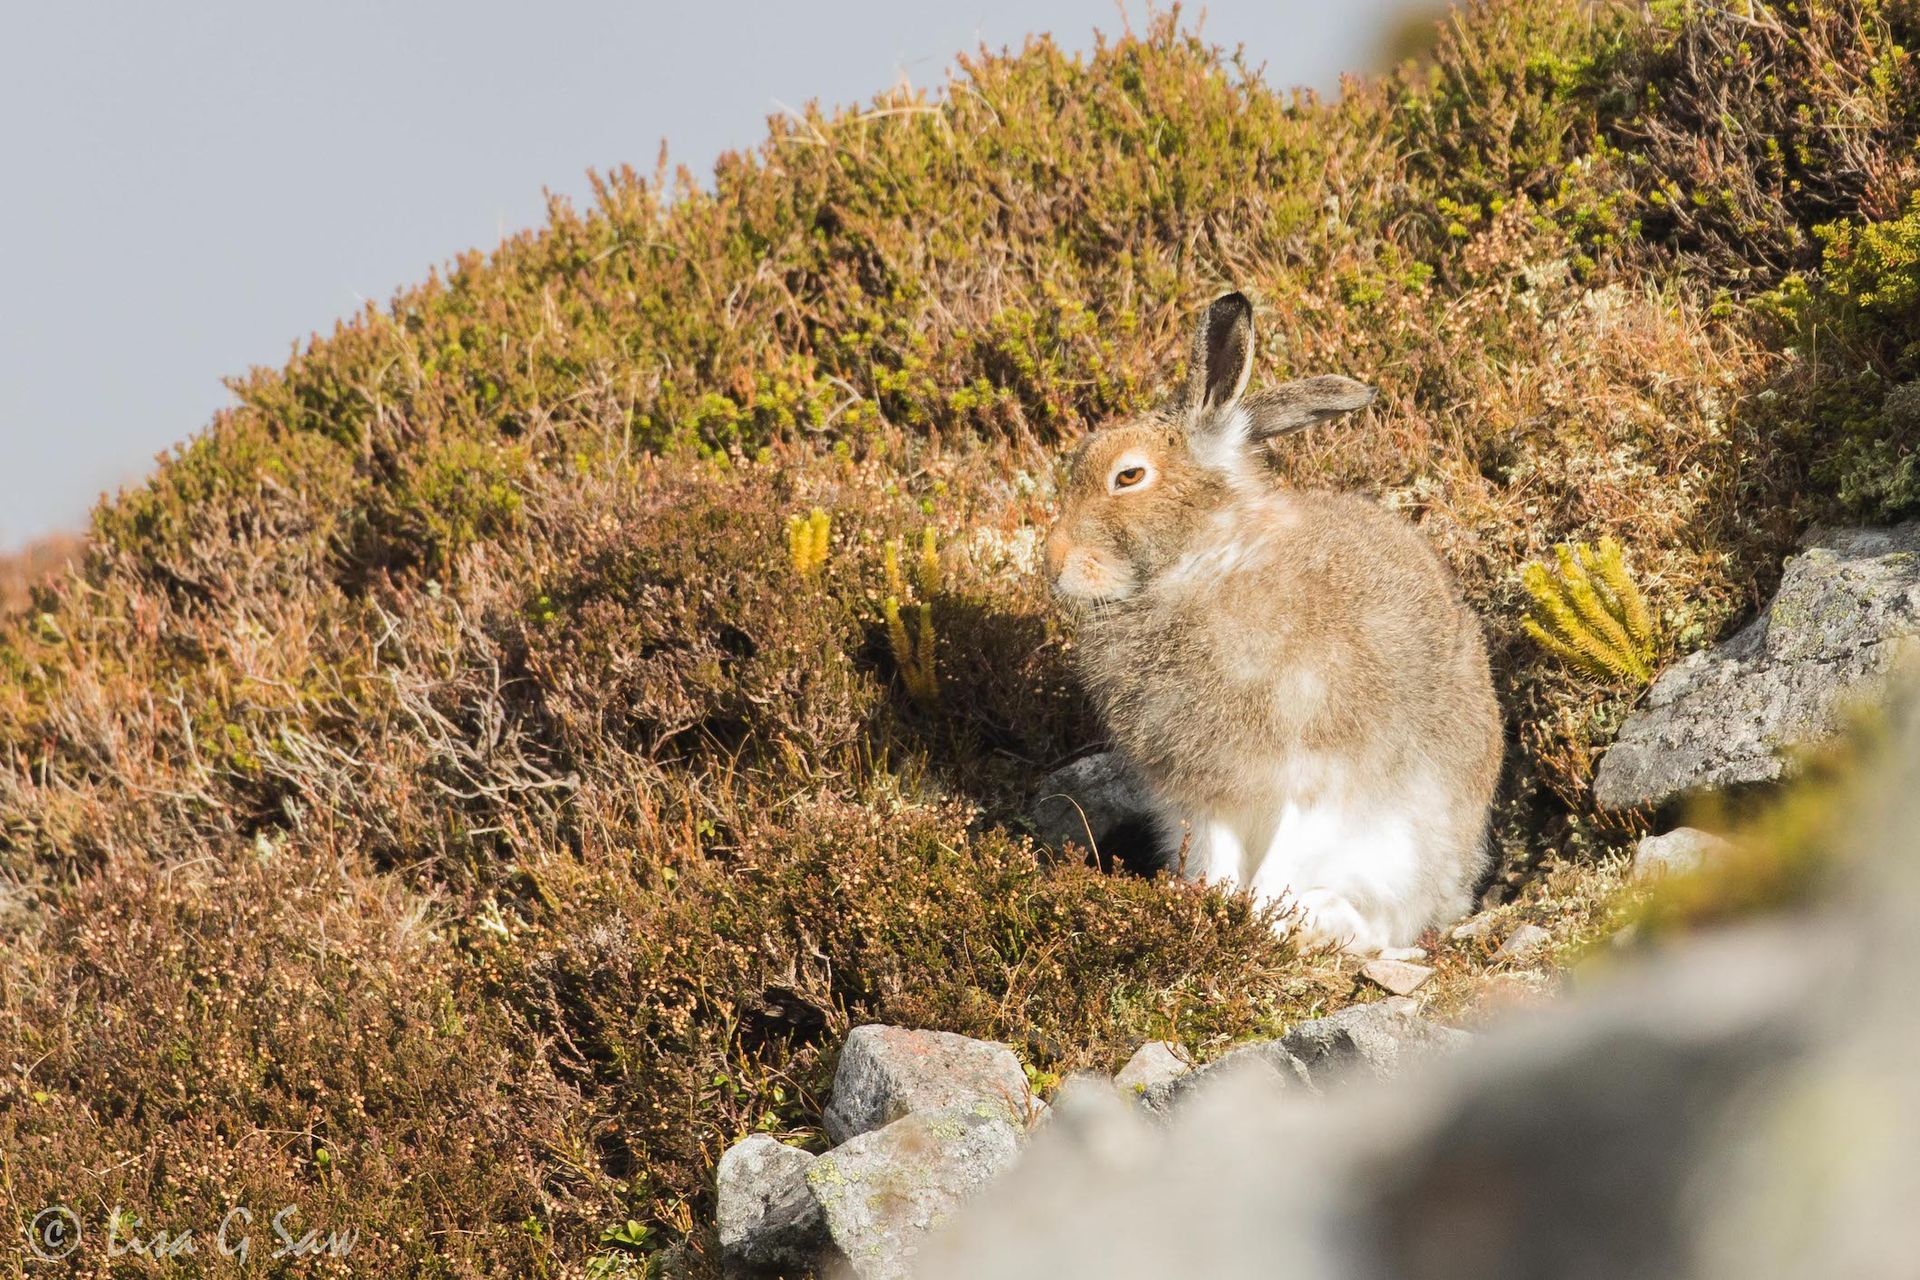 Mountain Hare looking very relaxed